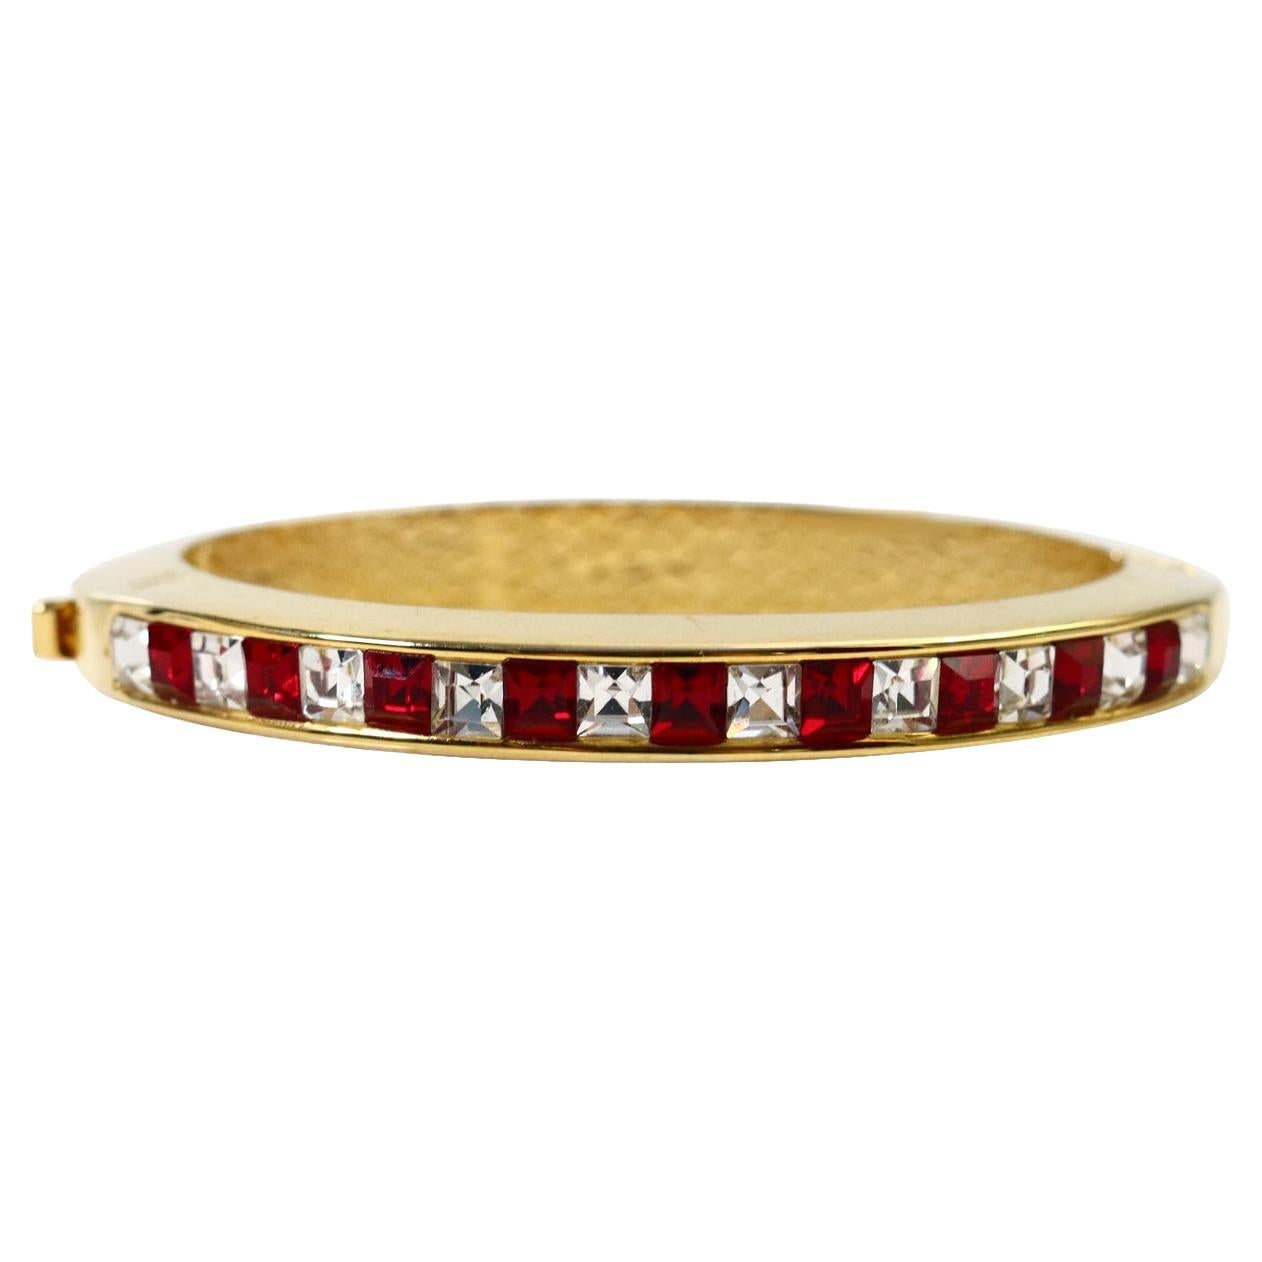 This rigid gold articulated bracelet is so well made.  The red and clear crystals are channel set and the gold is shiny.  These are perfect for stacking or for wearing alone.  I'm have several that I have not listed yet in various looks so let me